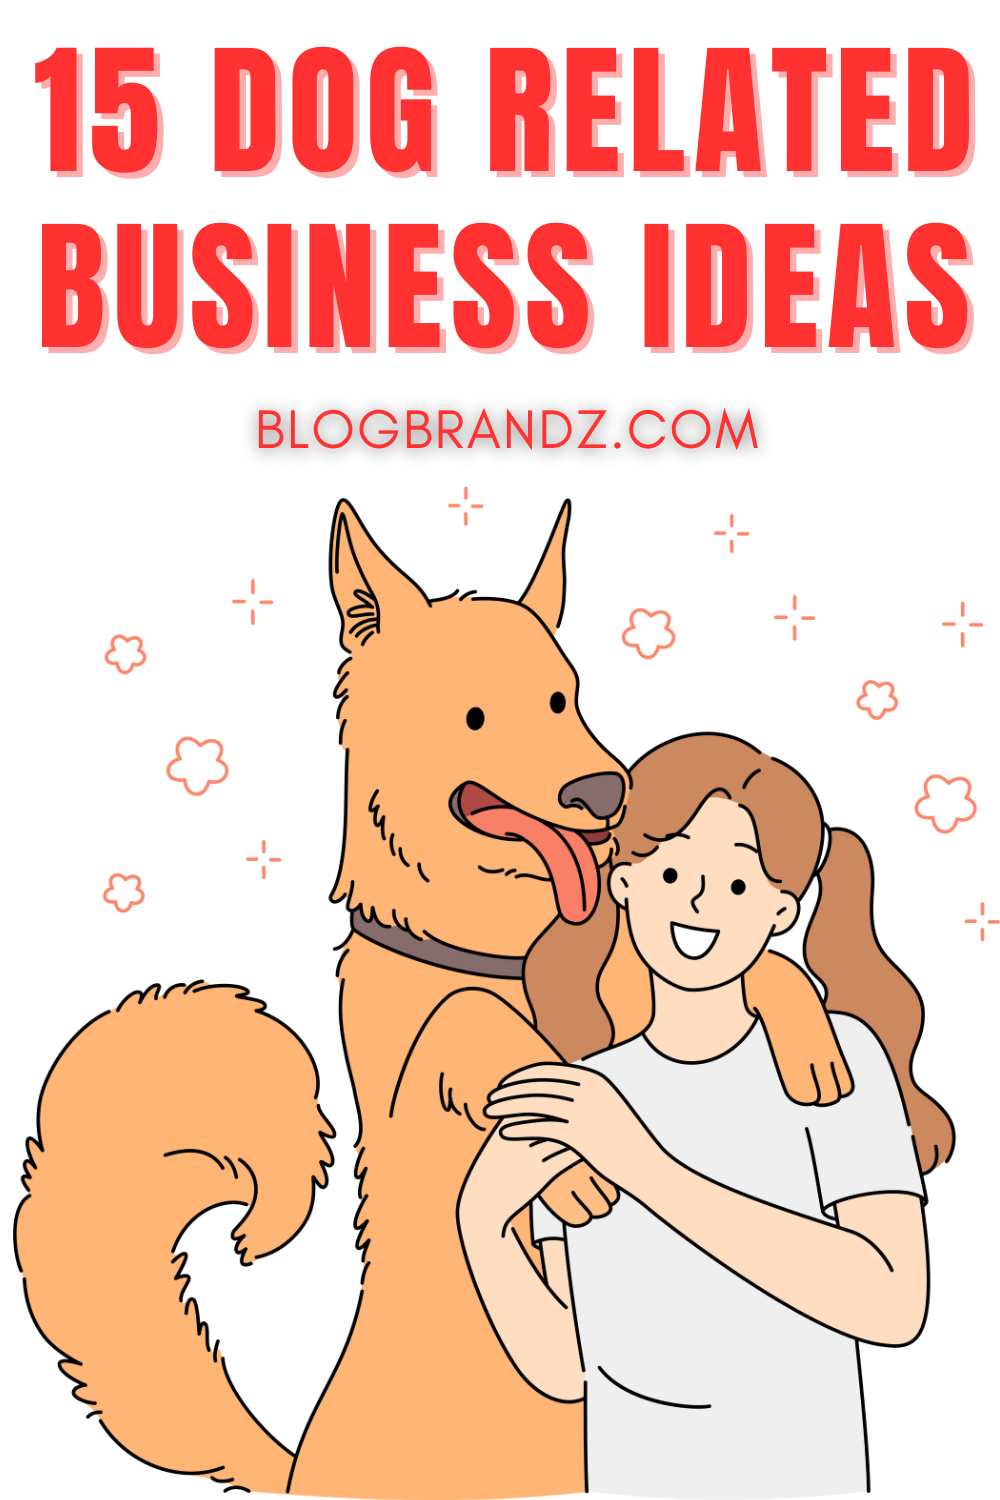 Dog Related Business Ideas